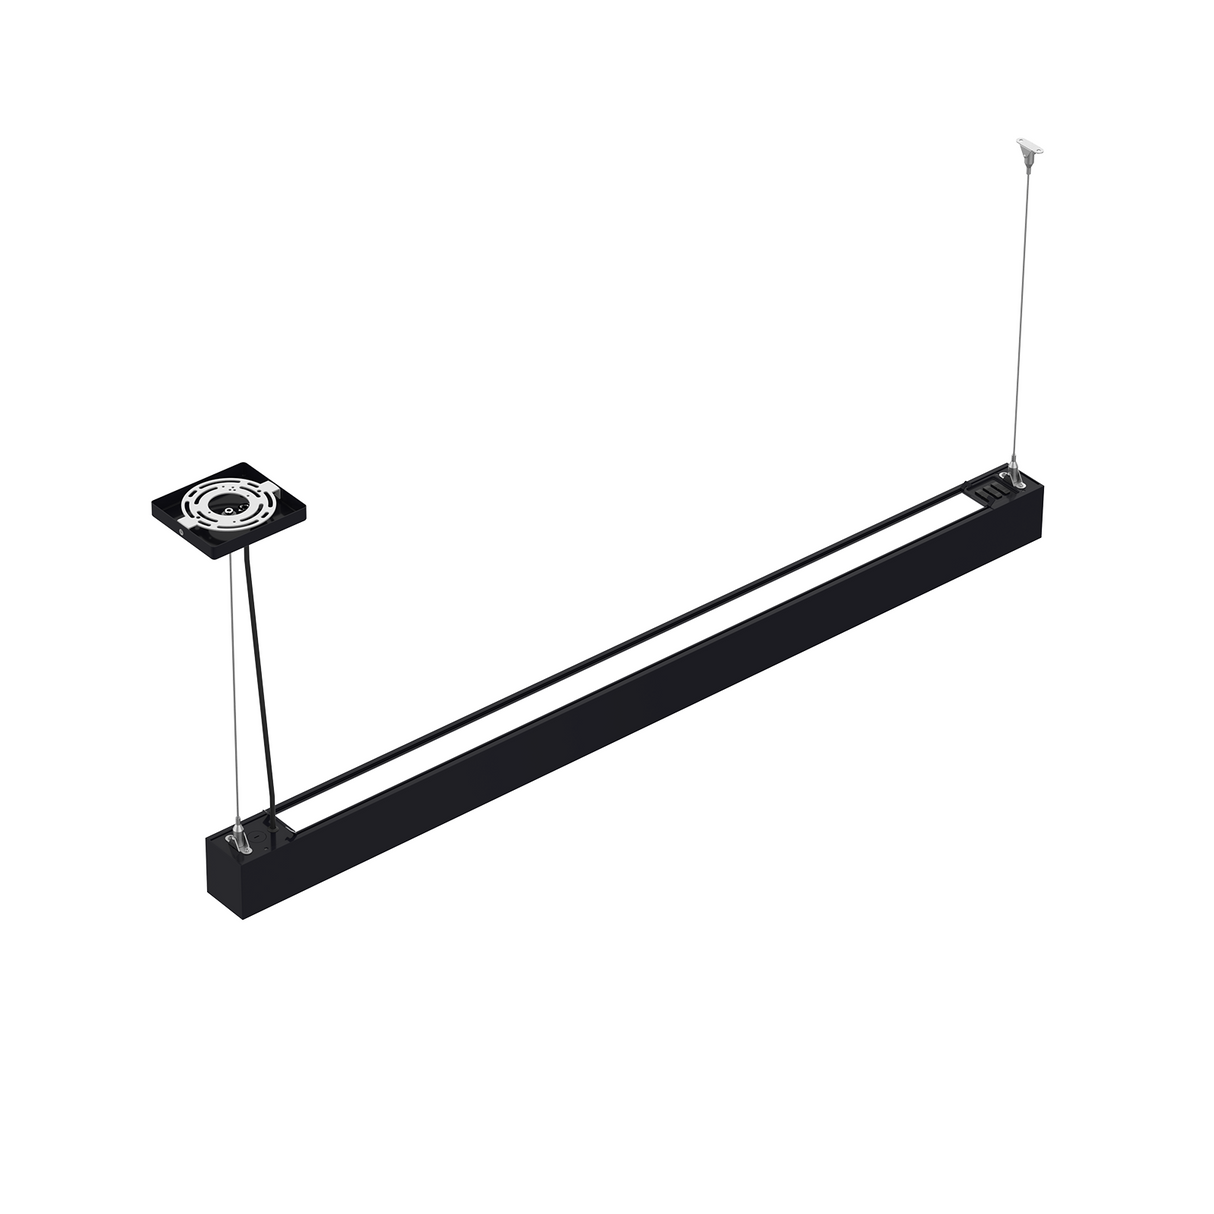 4ft 50W Architectural Up/Down Led Linear Light | LS-4FT50W-XXK